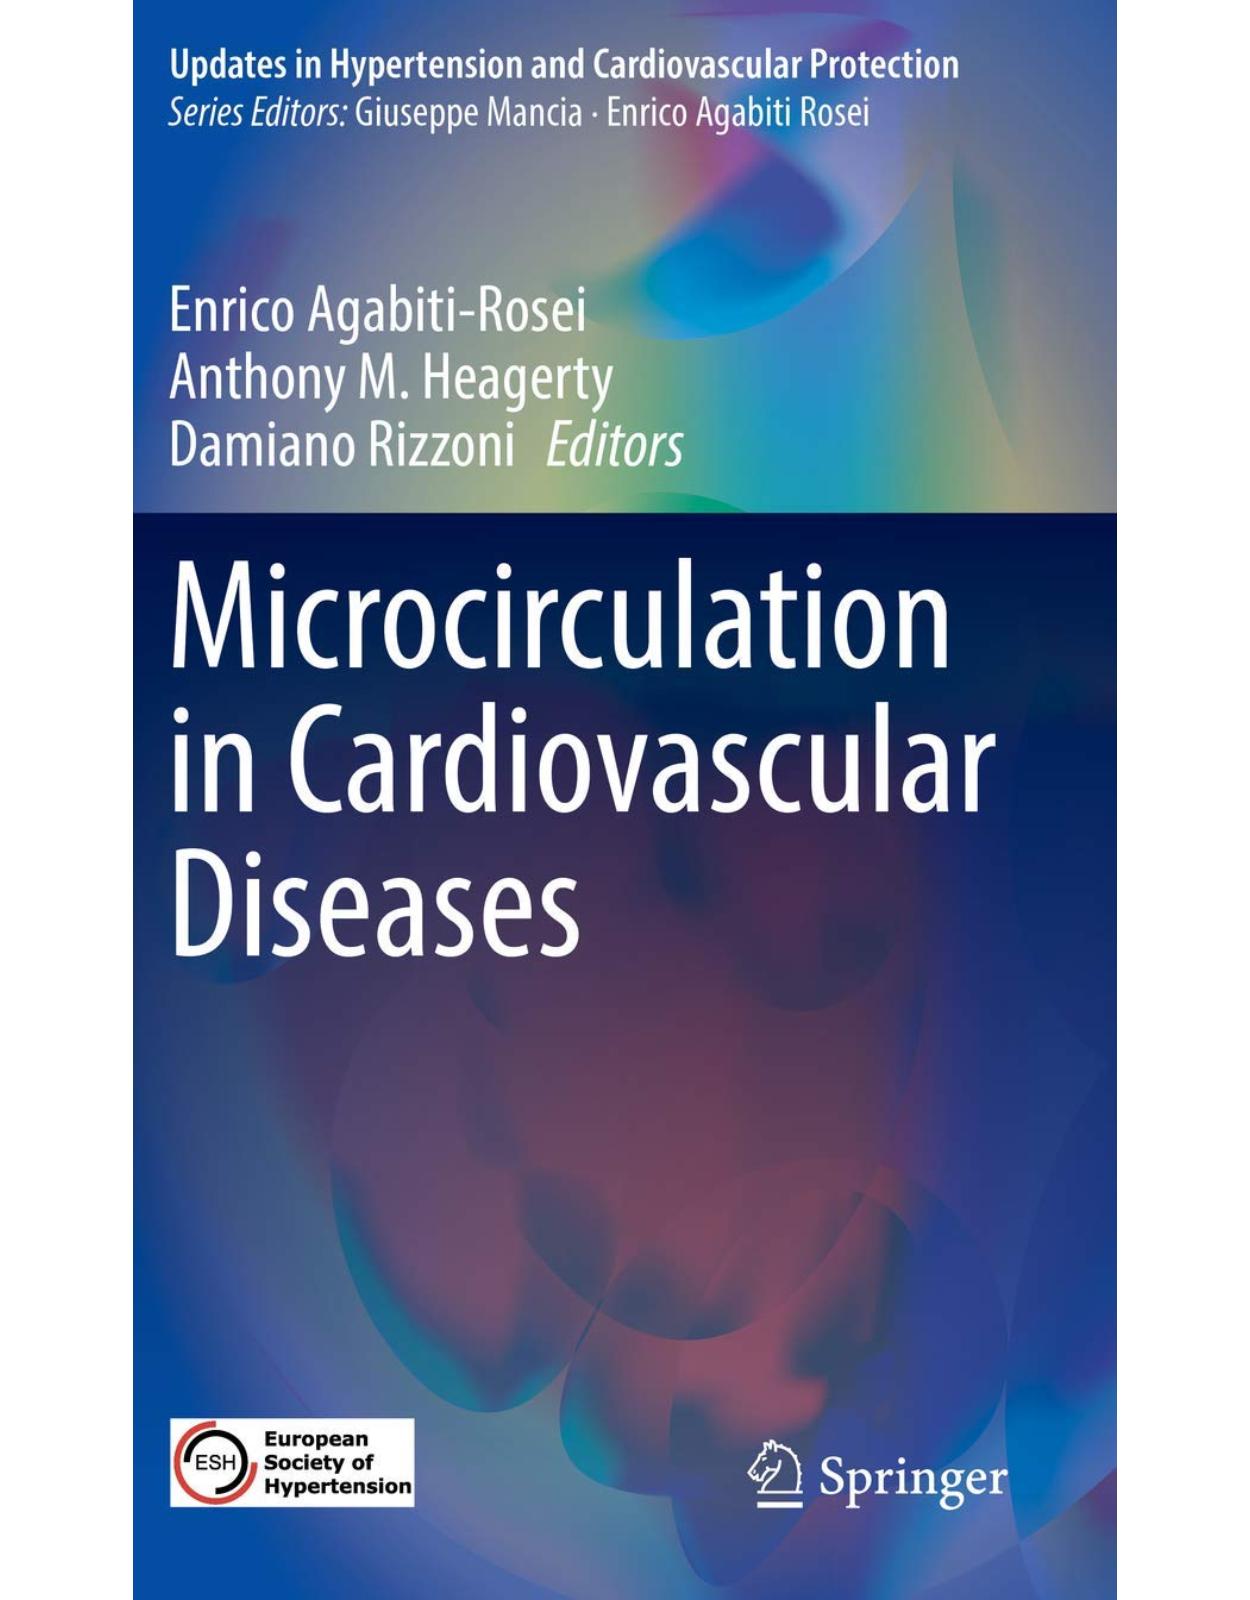 Microcirculation in Cardiovascular Diseases (Updates in Hypertension and Cardiovascular Protection) 